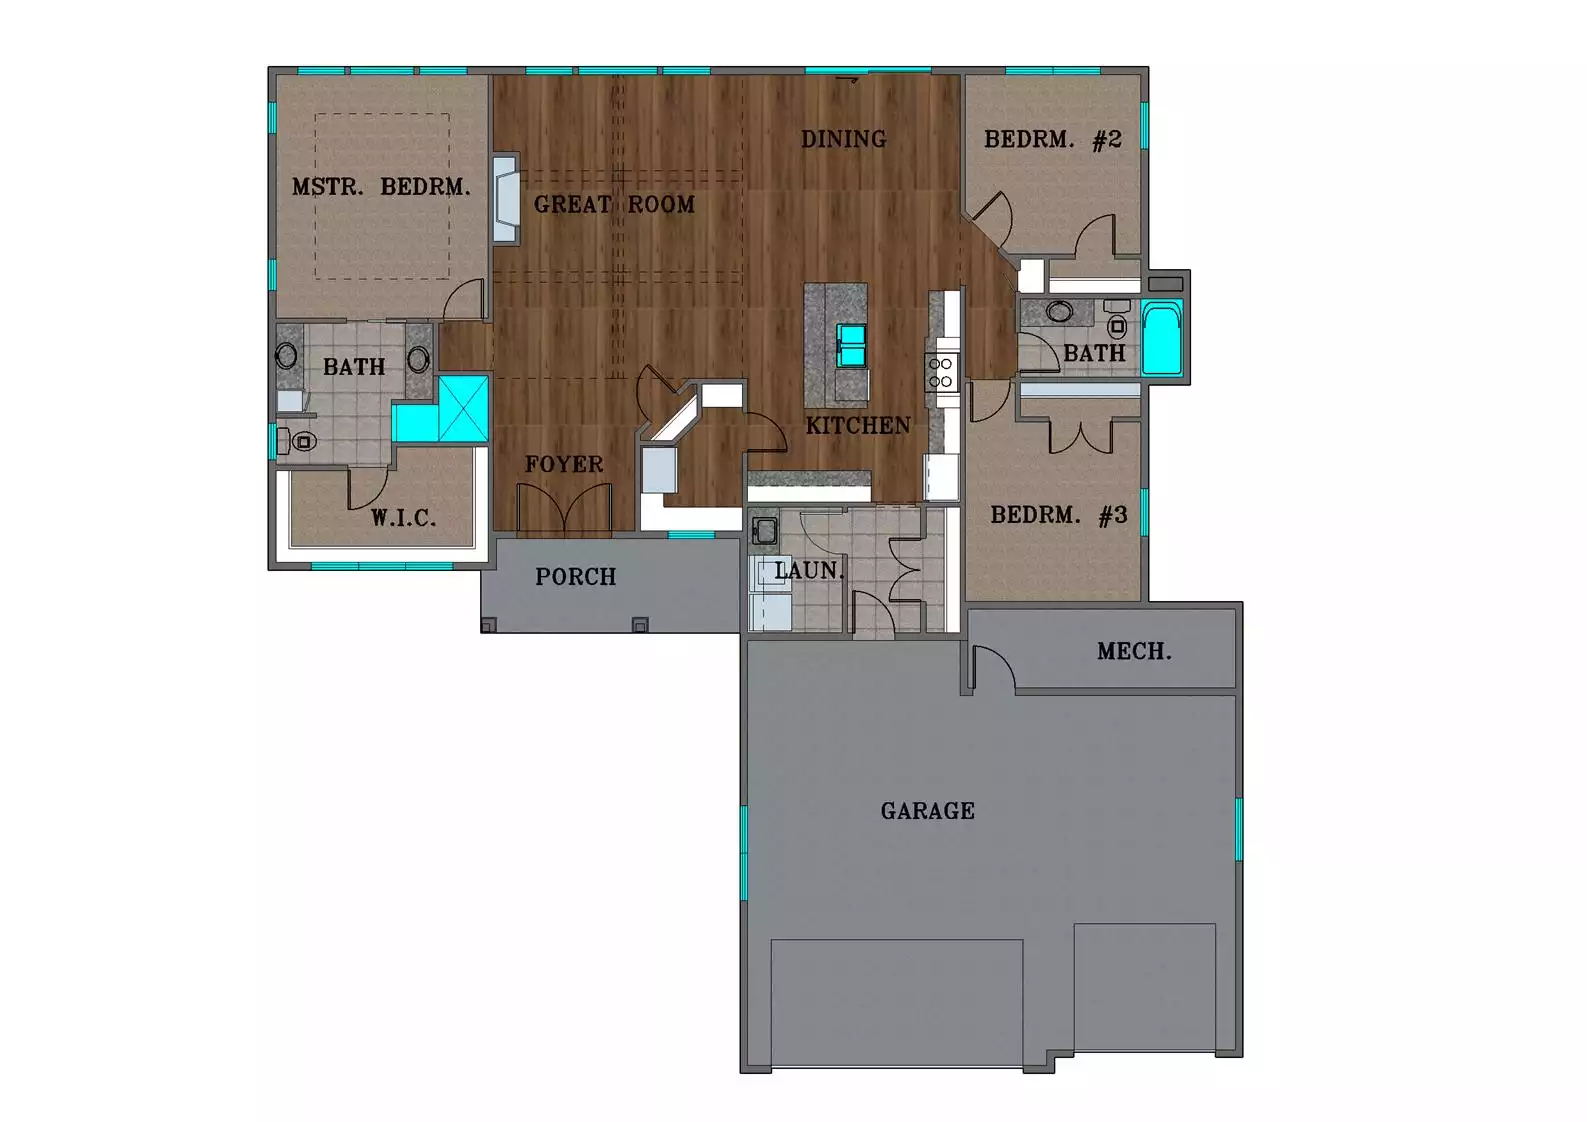 “Jenna” Home Plan #678 Front Color Rendering